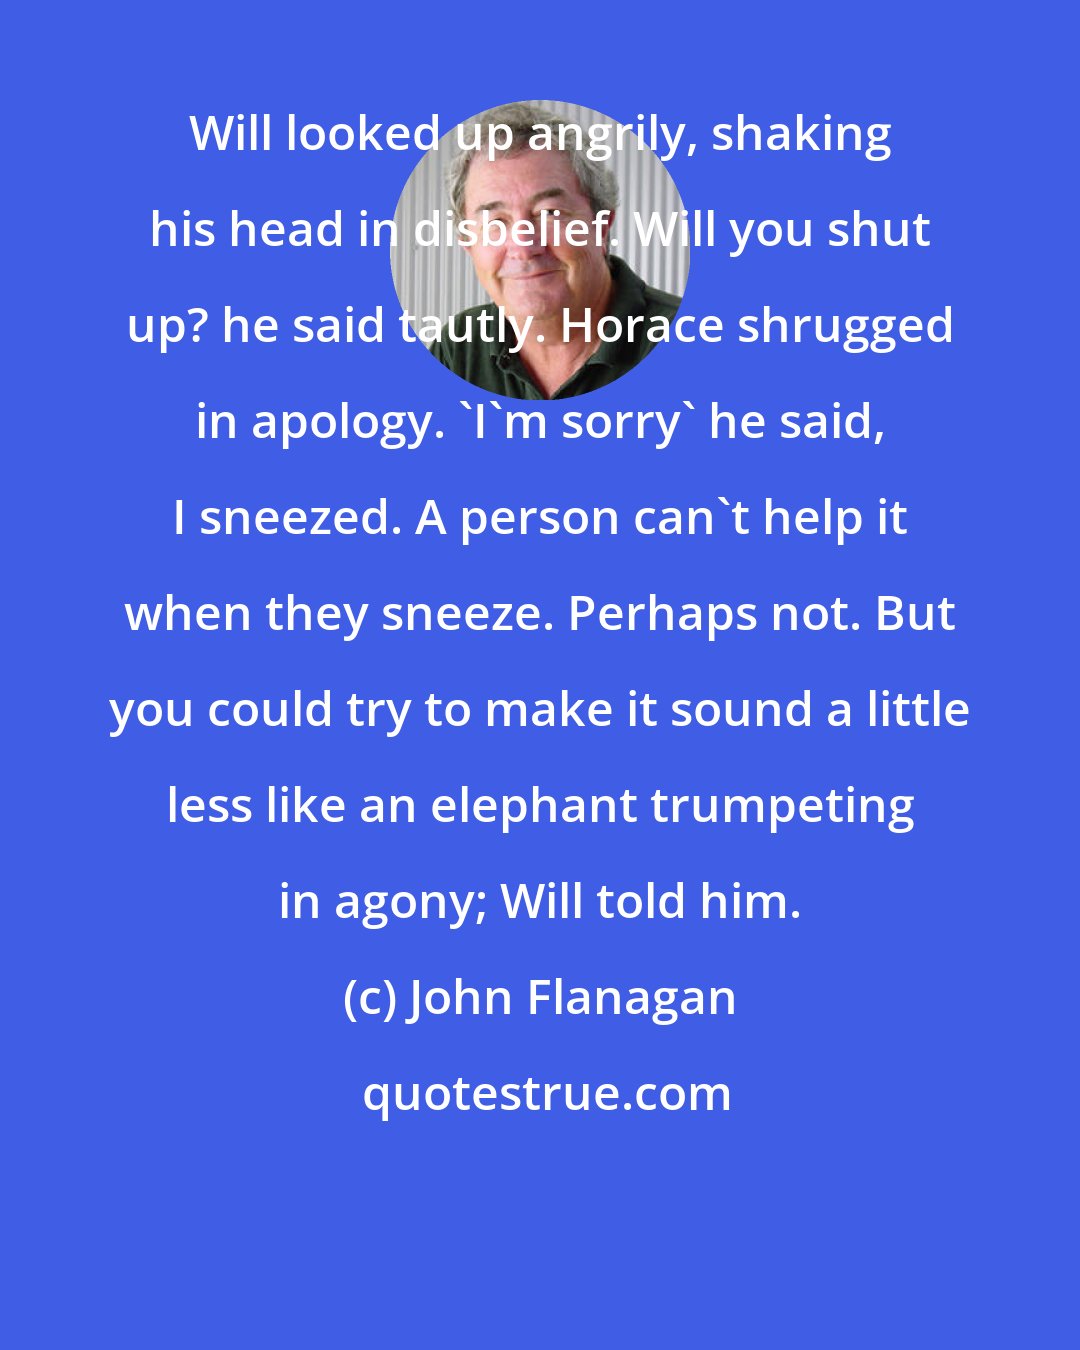 John Flanagan: Will looked up angrily, shaking his head in disbelief. Will you shut up? he said tautly. Horace shrugged in apology. 'I'm sorry' he said, I sneezed. A person can't help it when they sneeze. Perhaps not. But you could try to make it sound a little less like an elephant trumpeting in agony; Will told him.